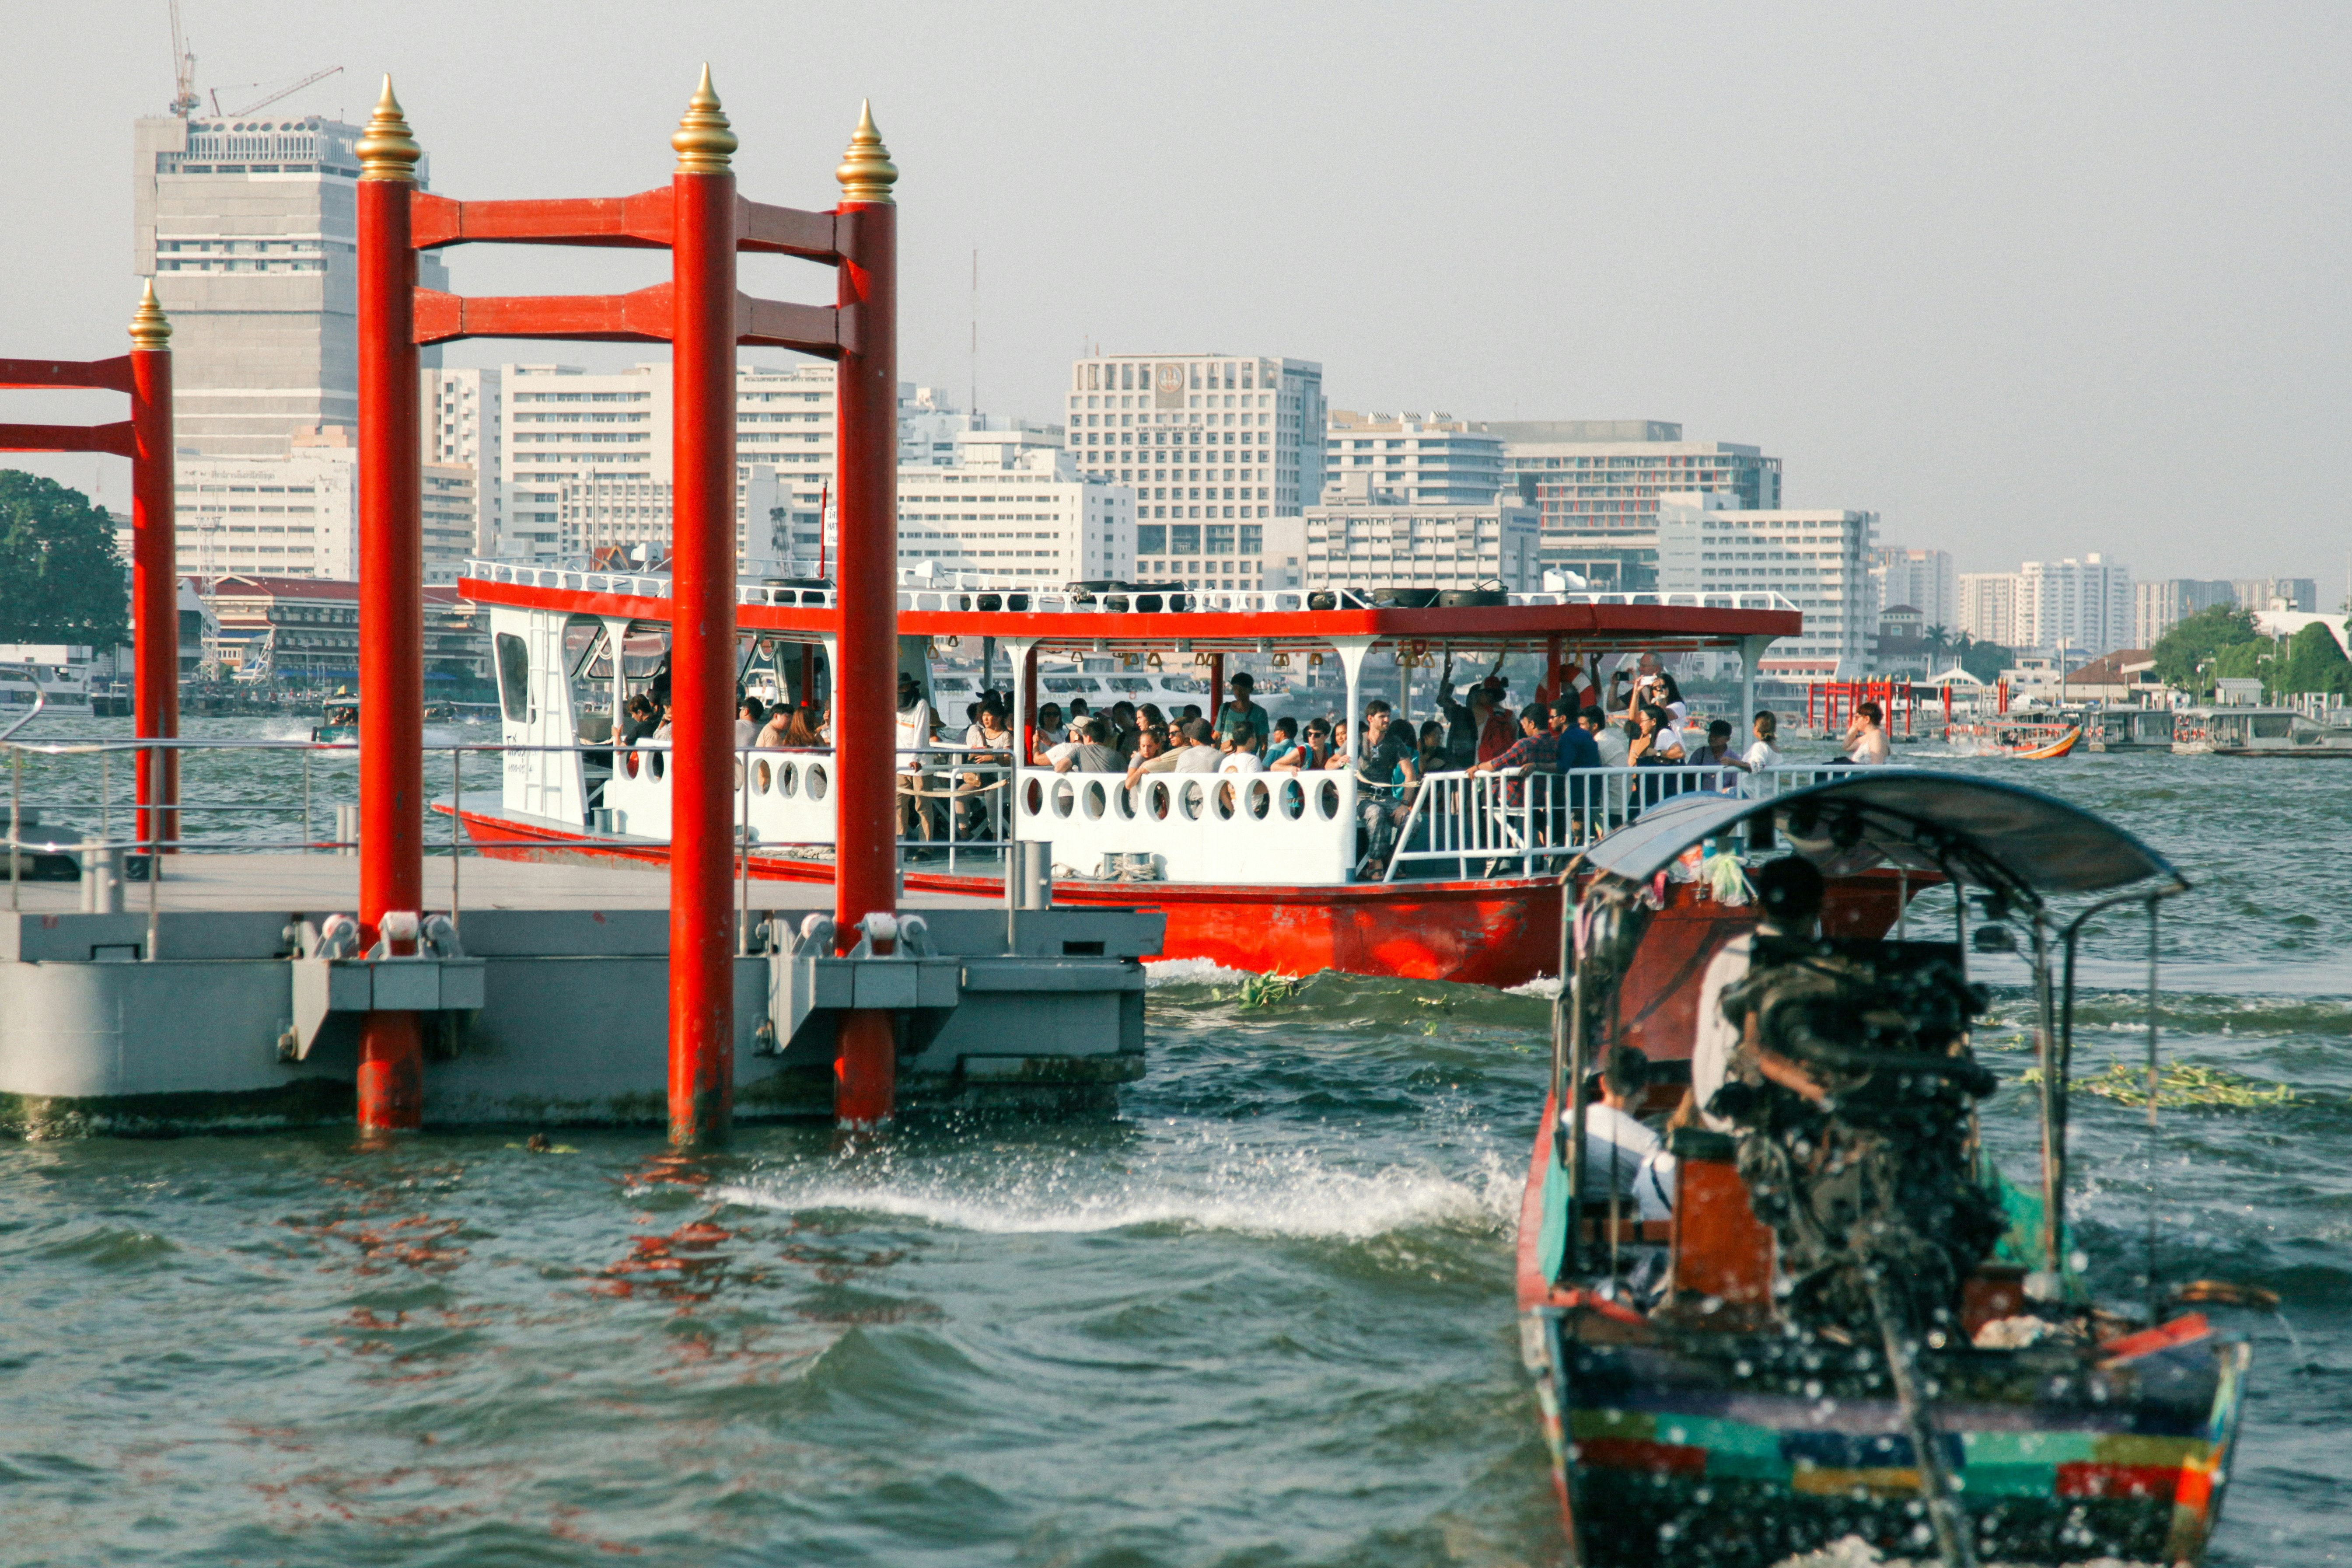 people riding on boat during daytime